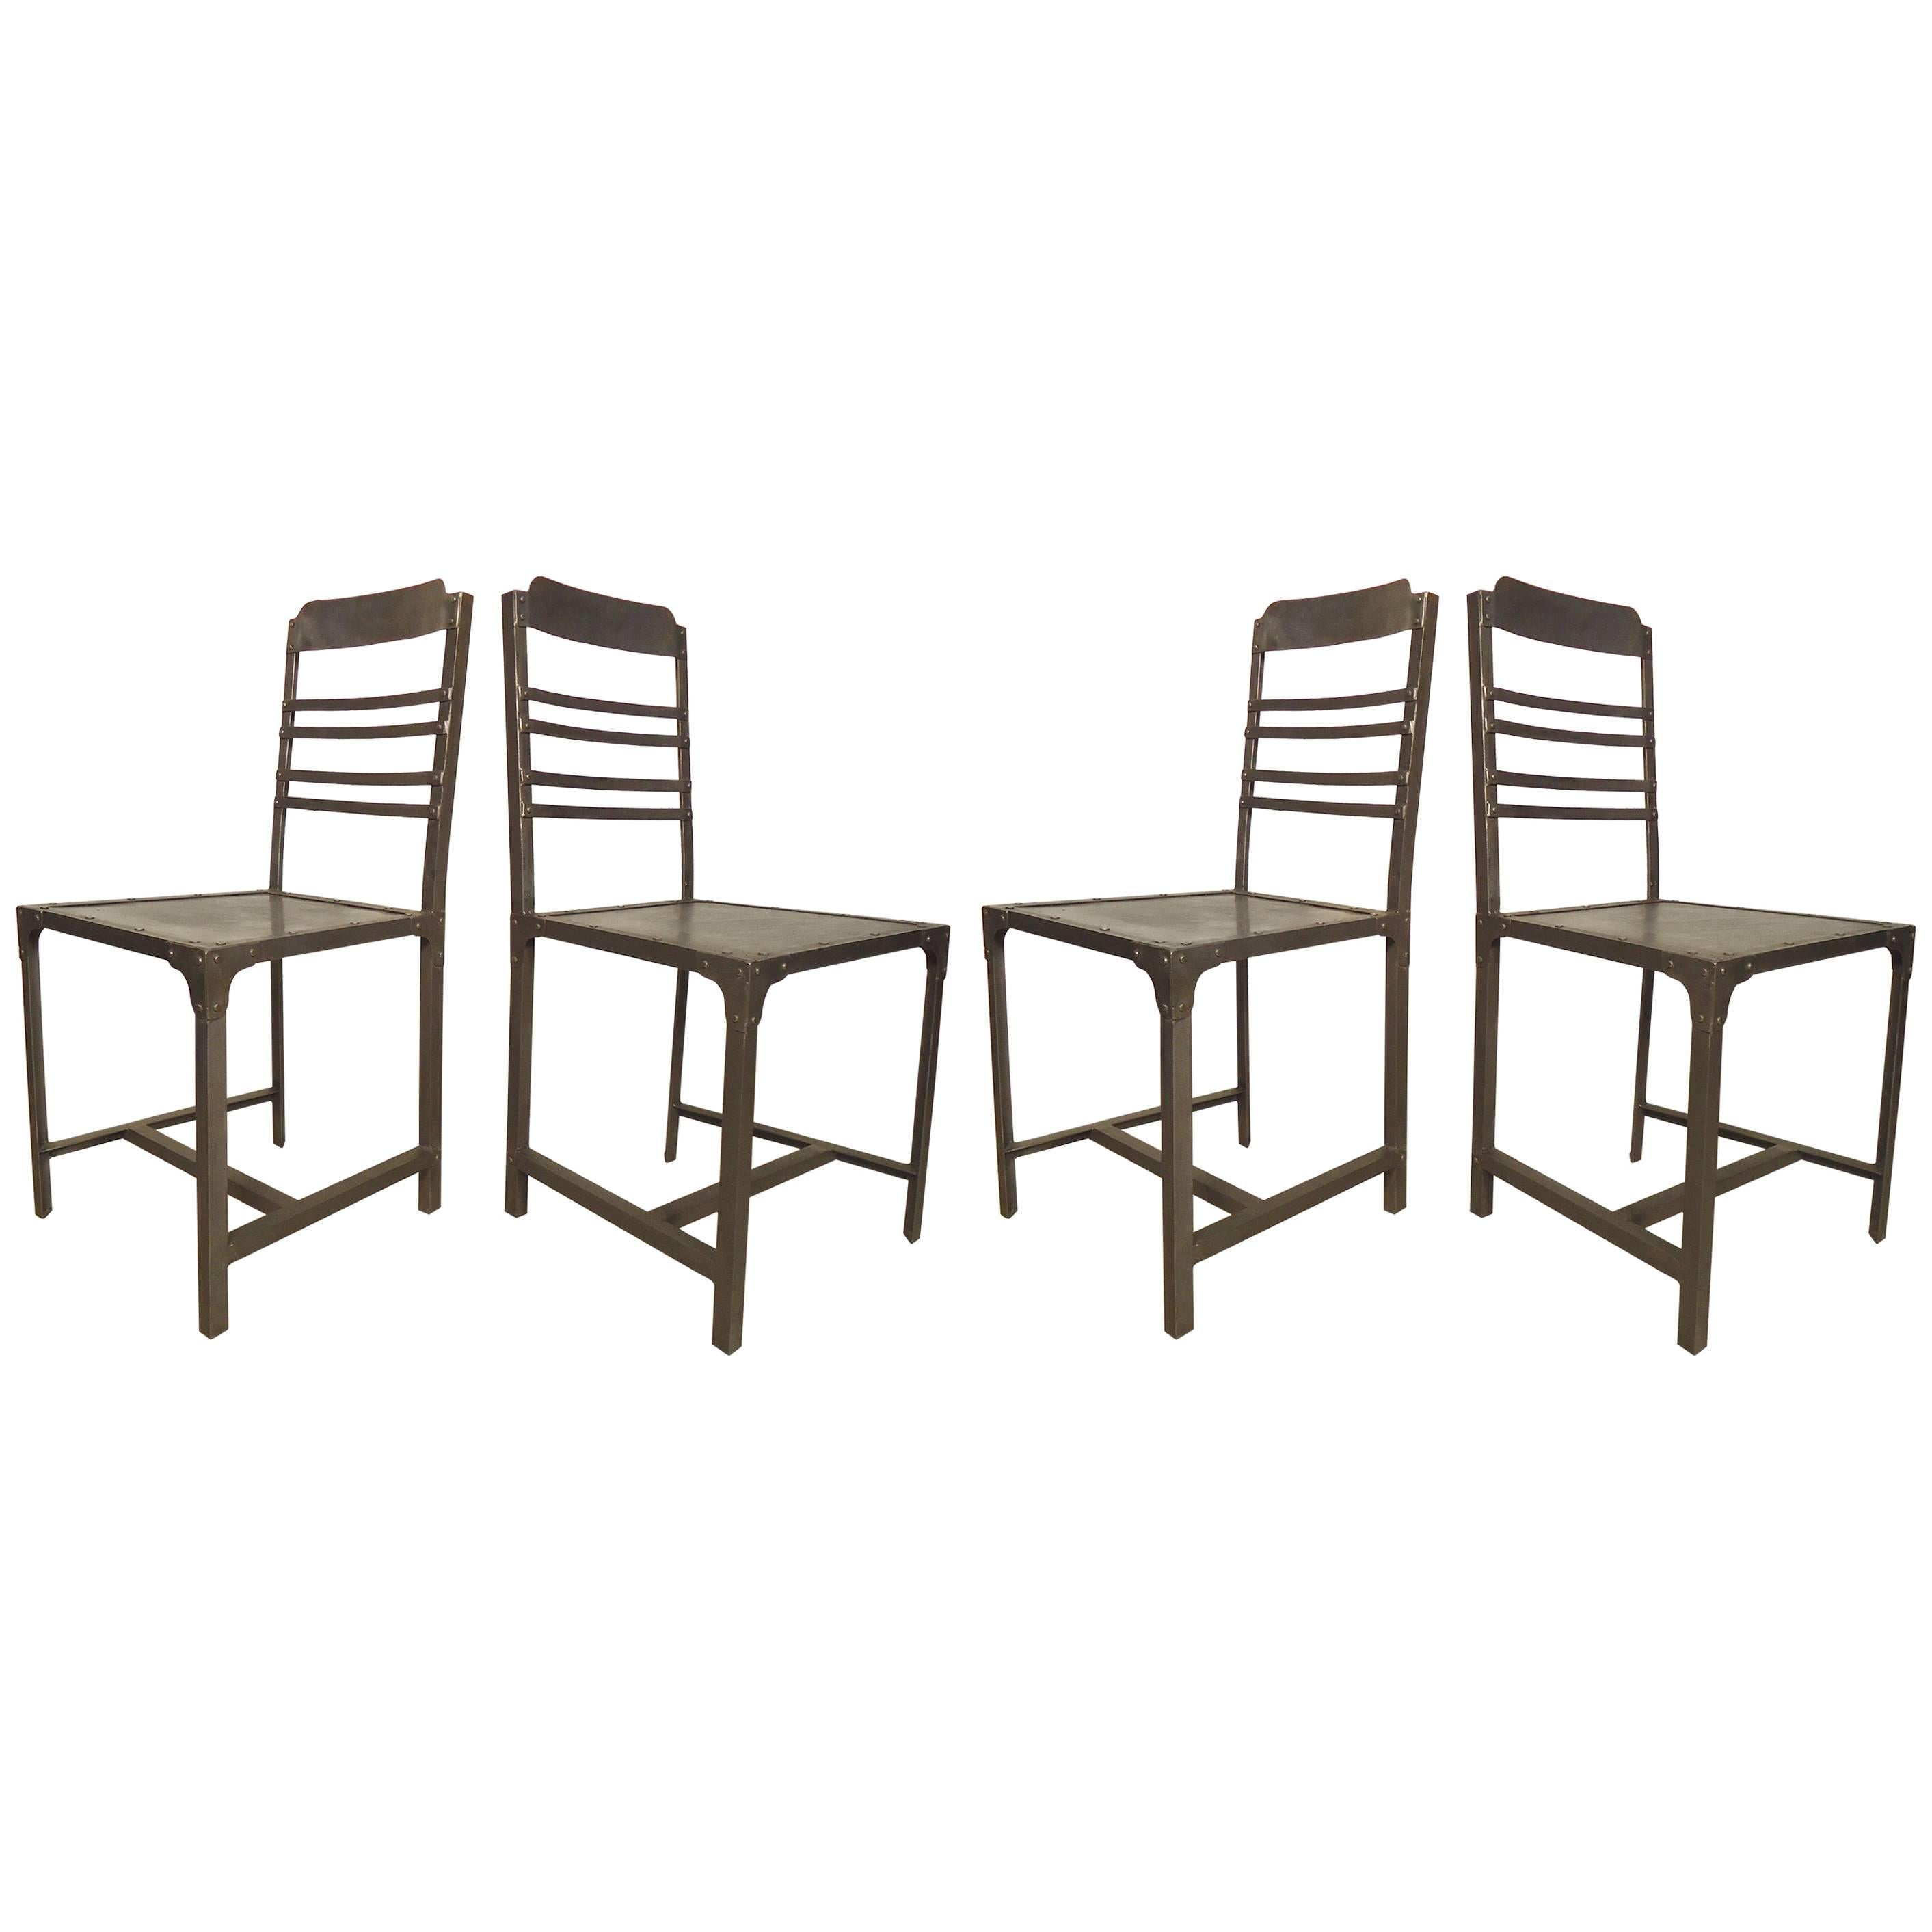 Set of Four Industrial Style Chairs